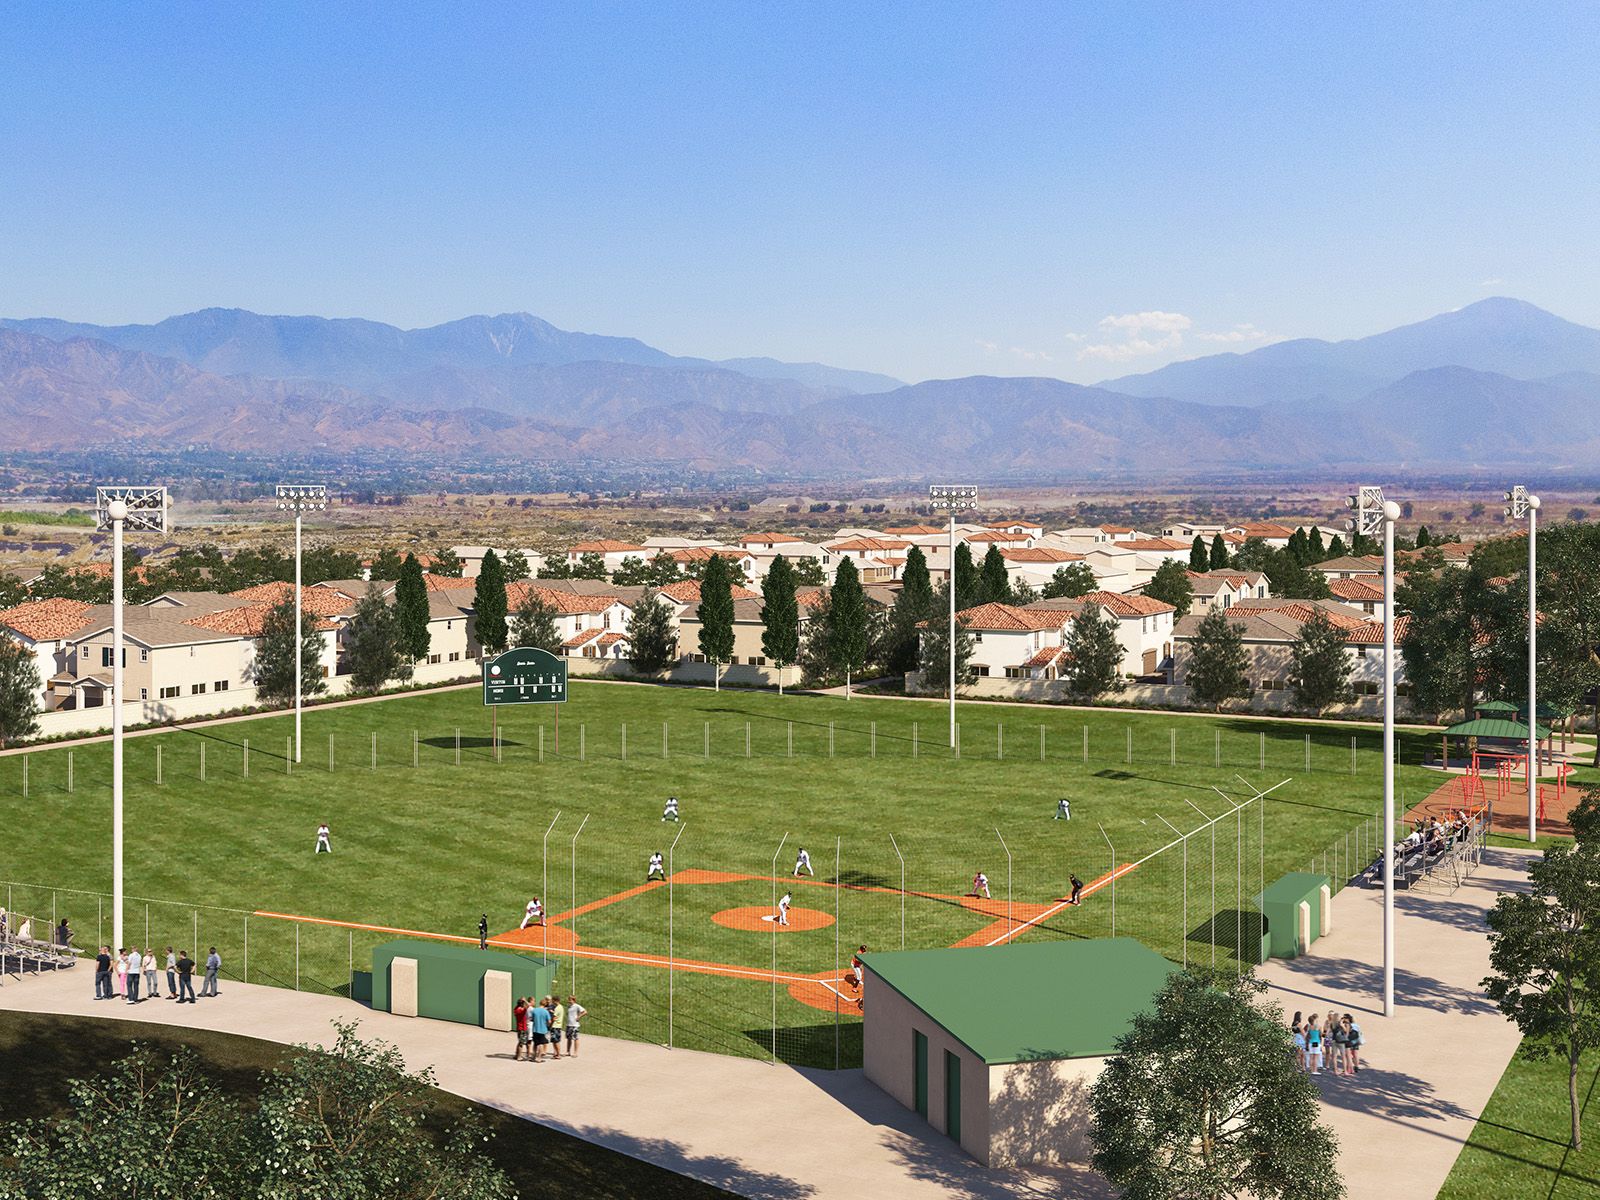 Practice your pitch at the baseball field located within the community.